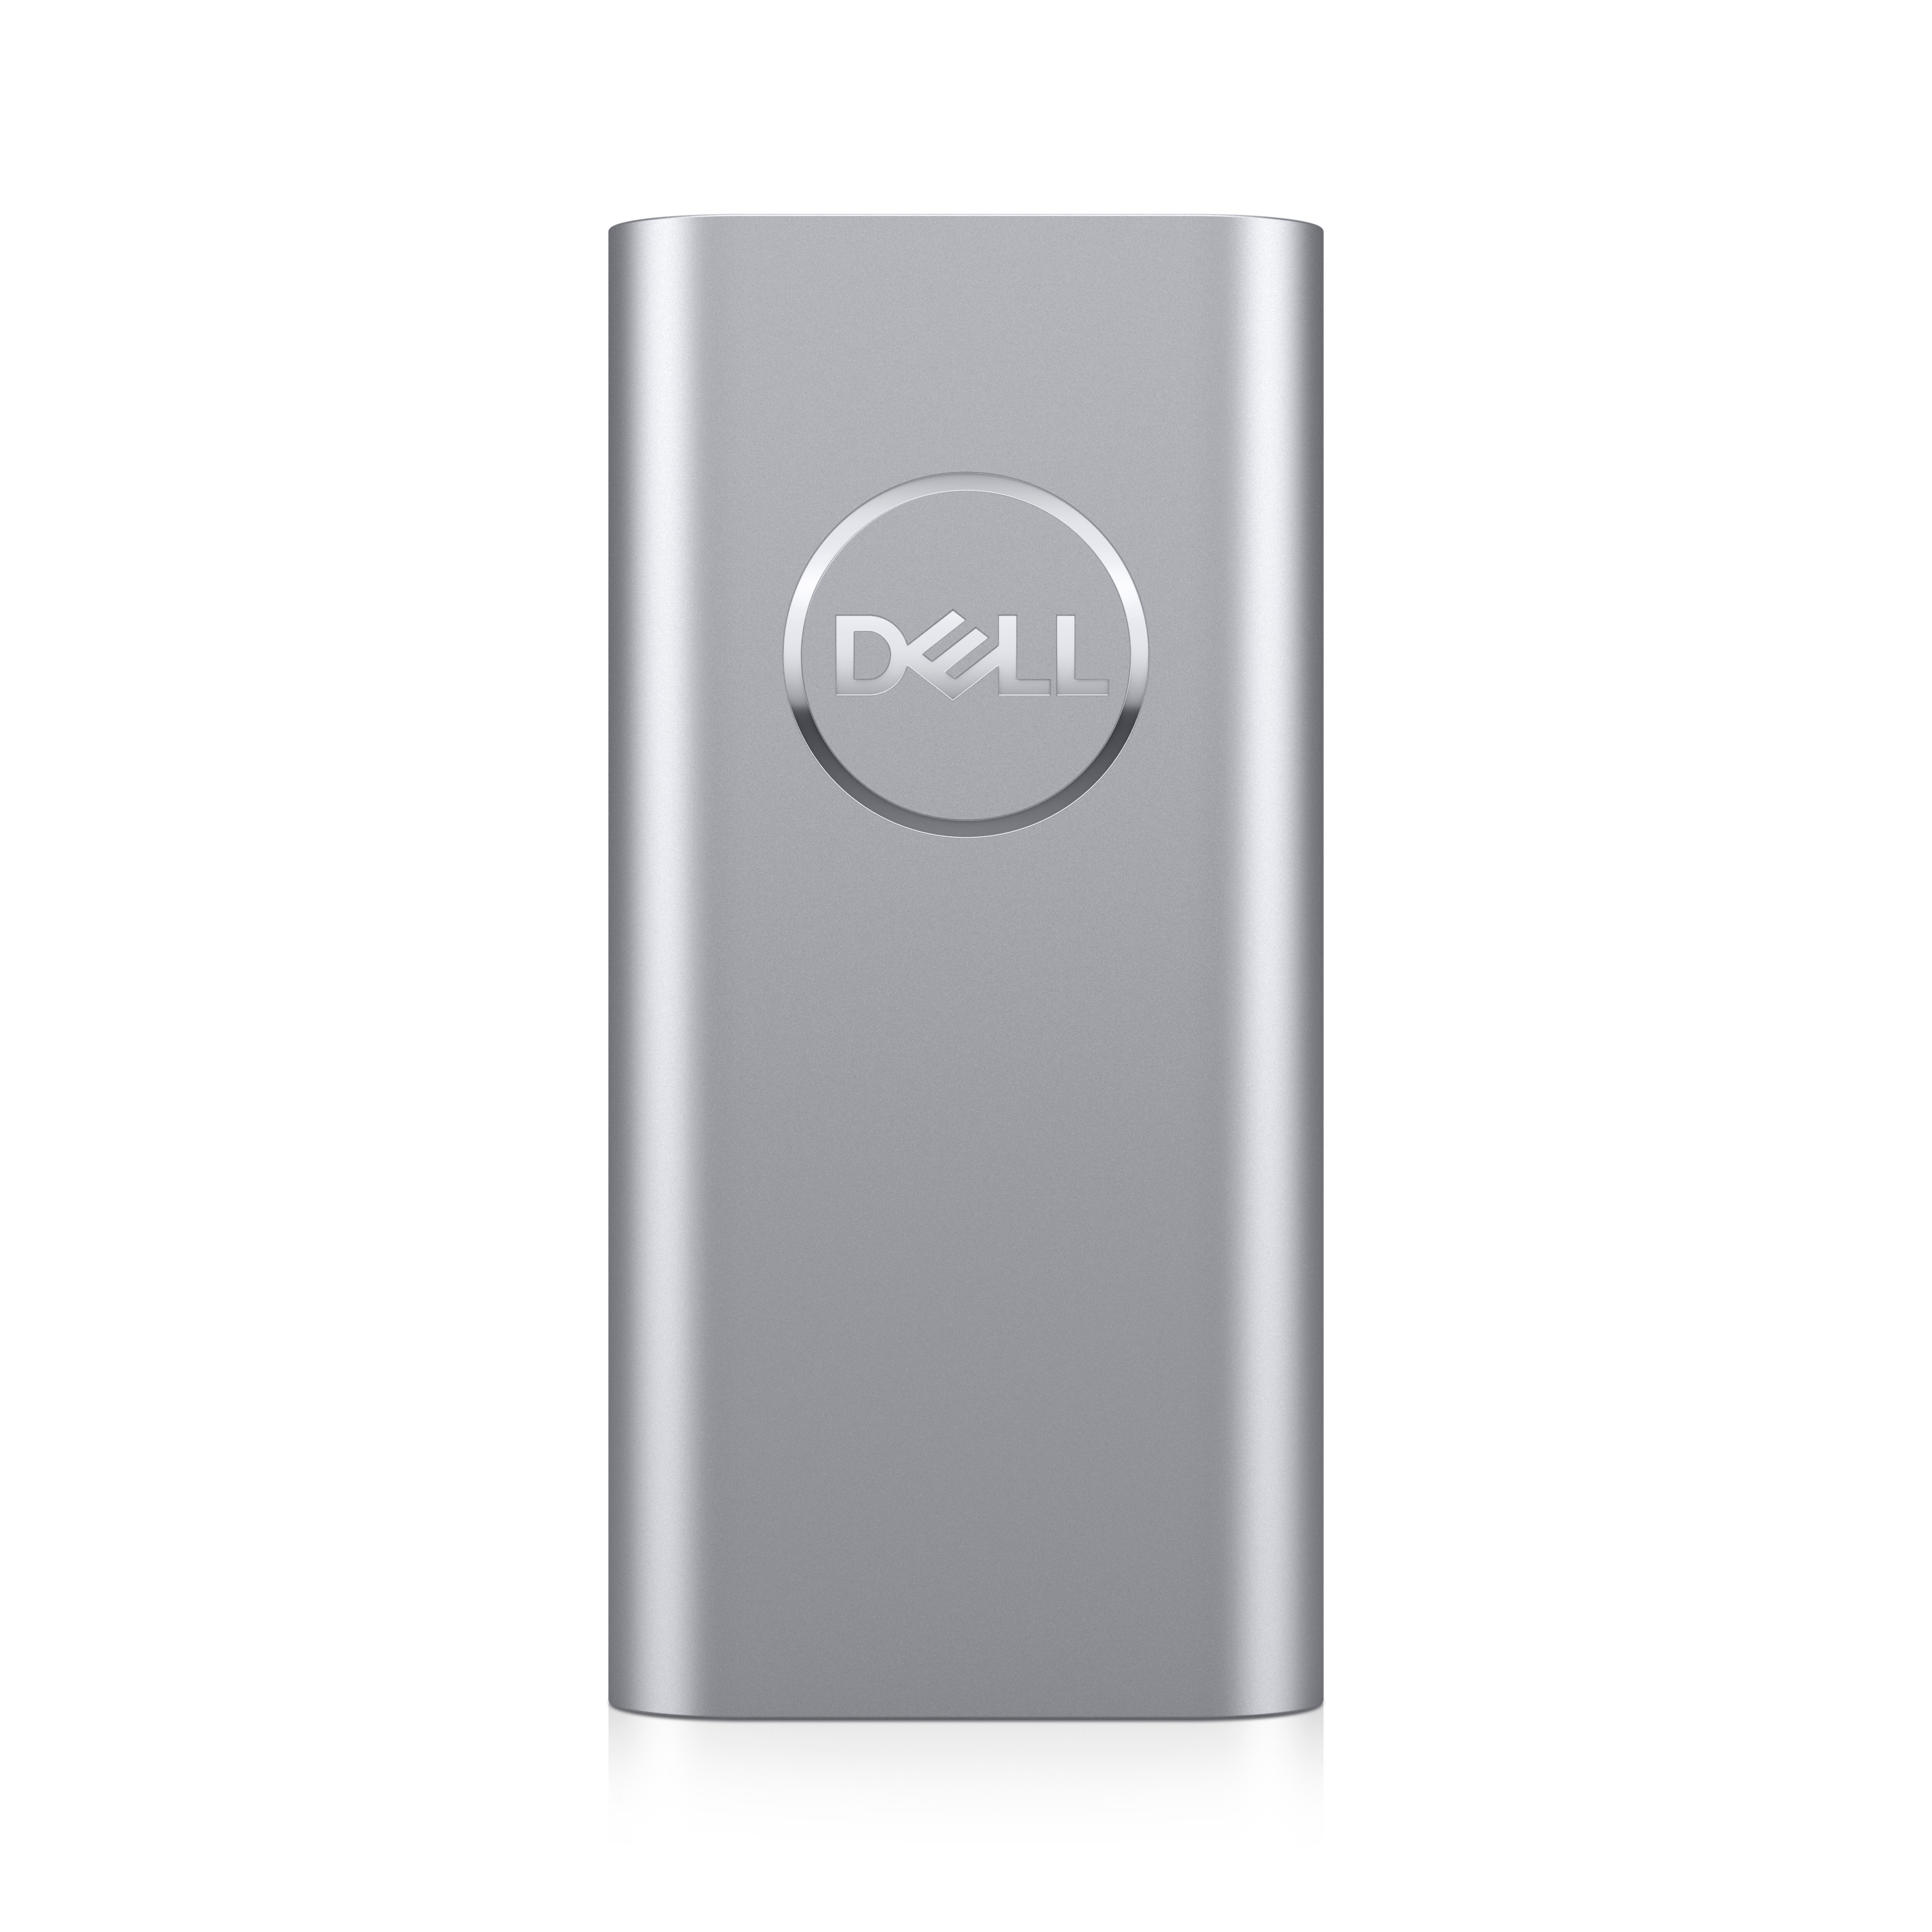 Support for Dell Portable Thunderbolt™ 3 SSD, 1TB | Documentation